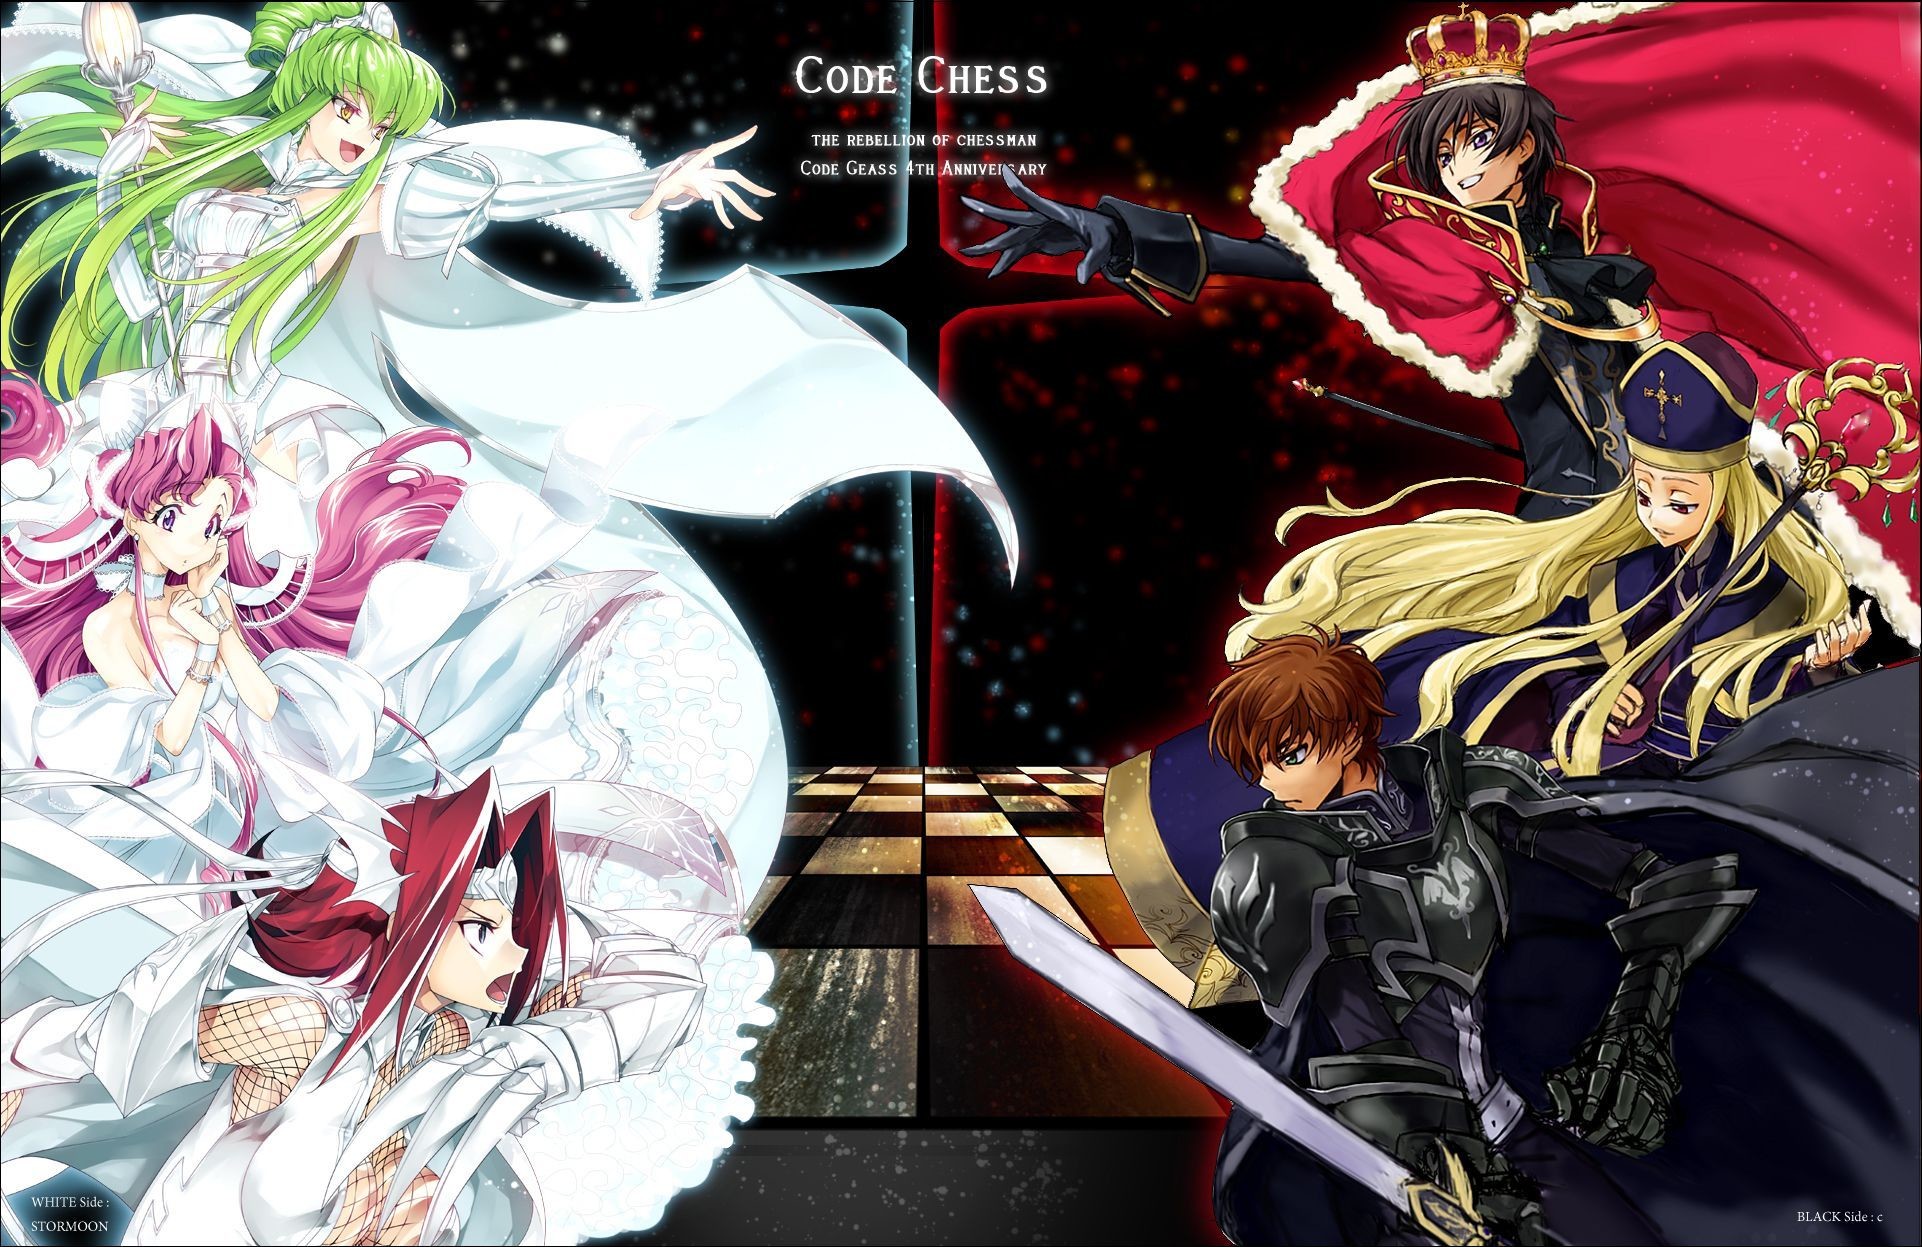 1922x1247 Code Geass (March 13, 2019) - Wallpapers and Pictures